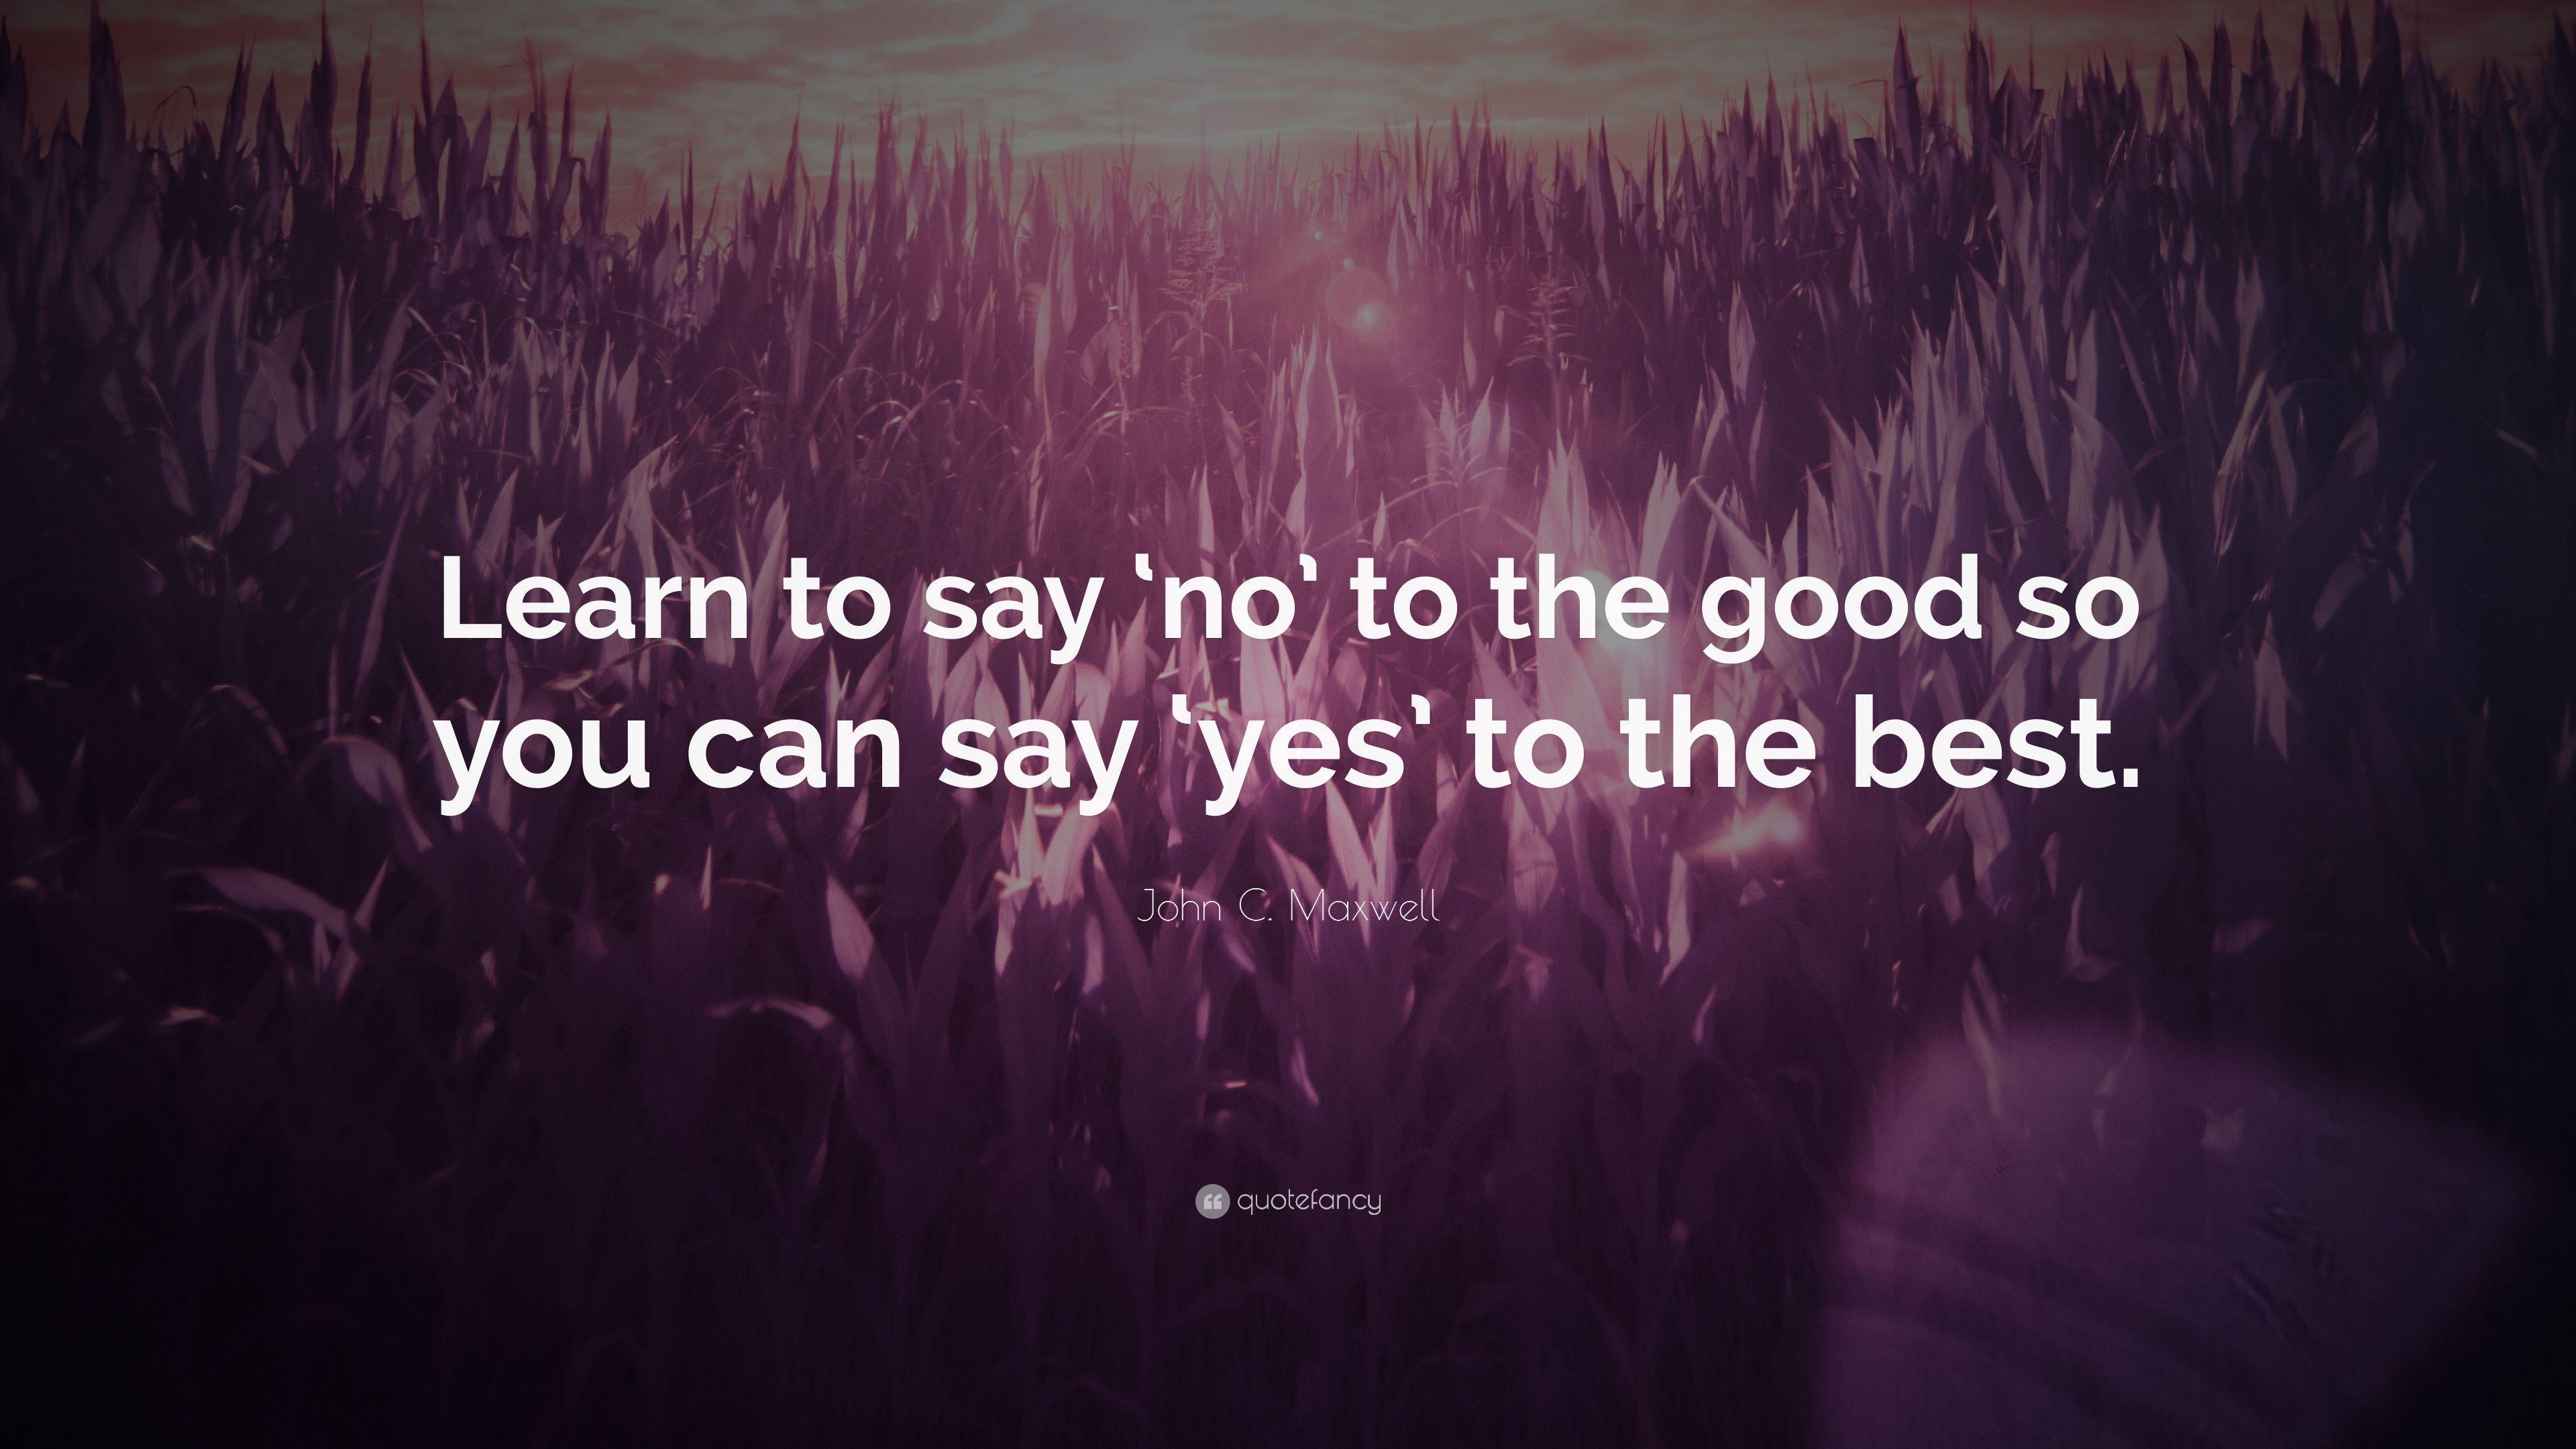 John C. Maxwell Quote: "Learn to say 'no' to the good so you...